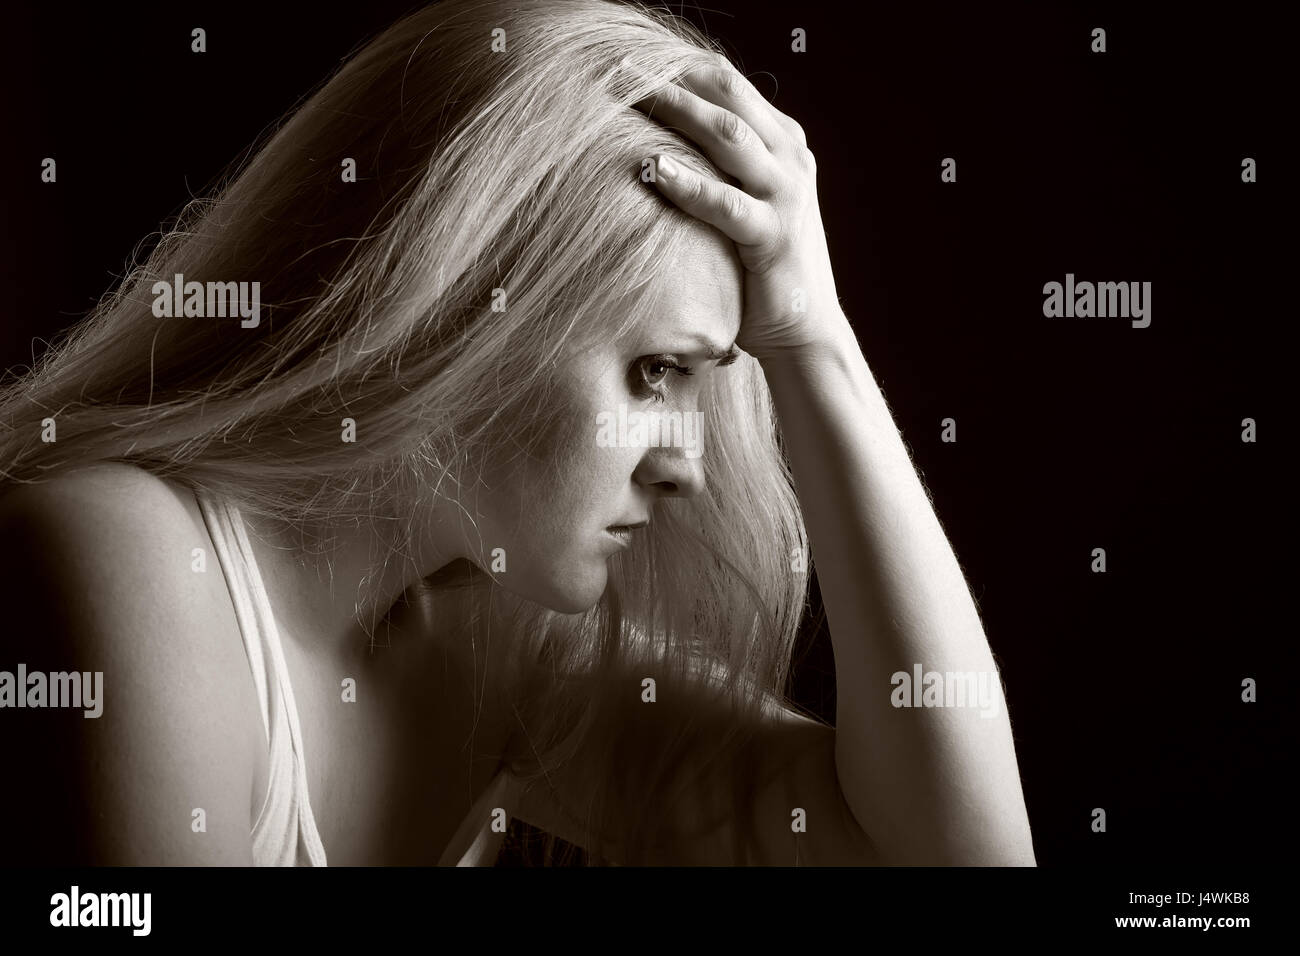 Portrait of a sad young woman. Black and white photo Stock Photo